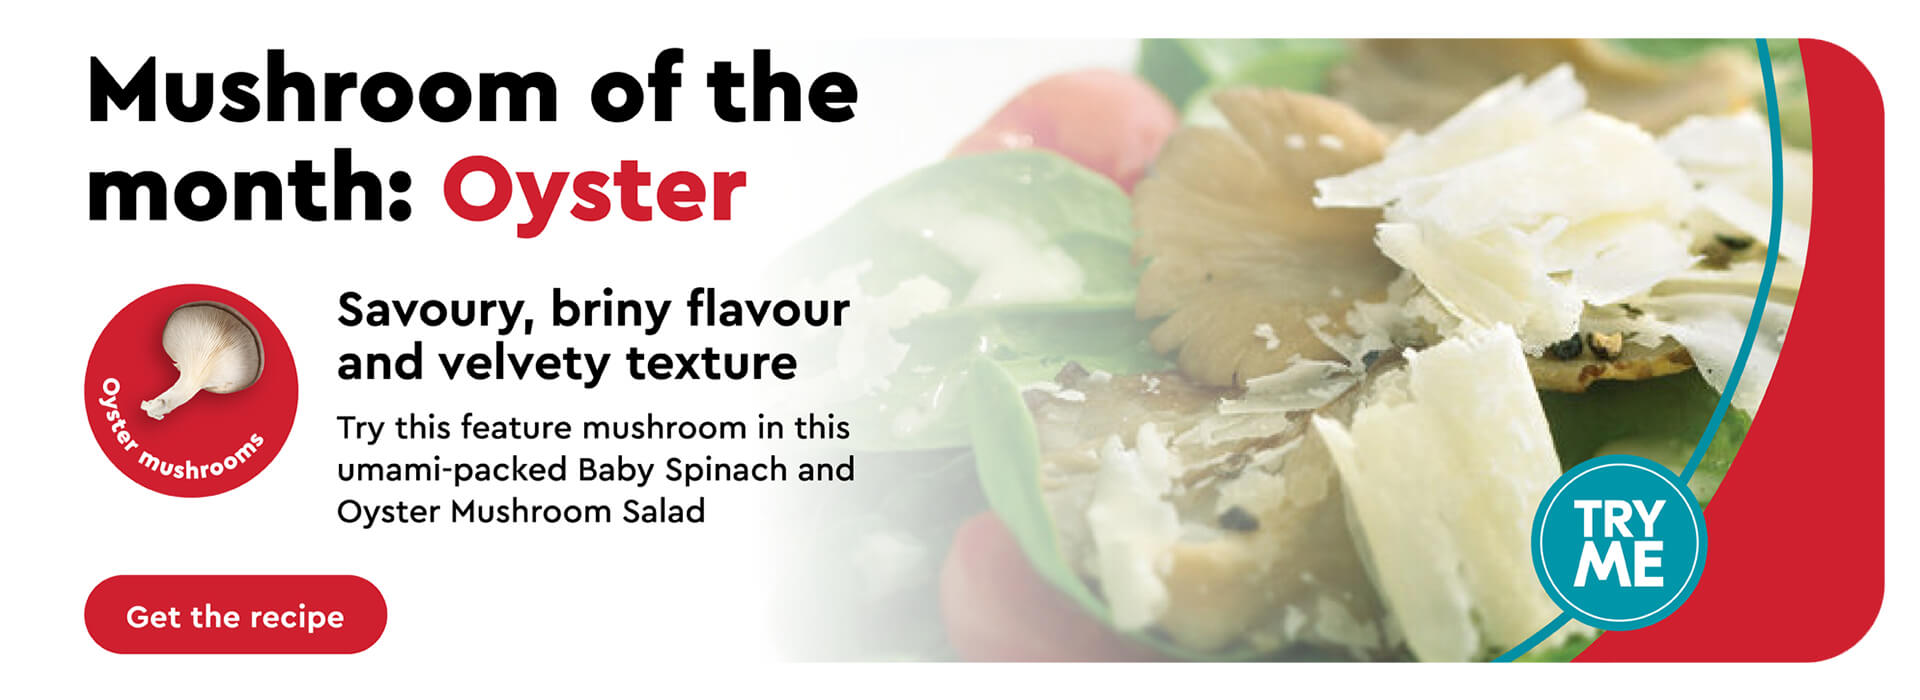 Baby spinach and oyster mushroom salad